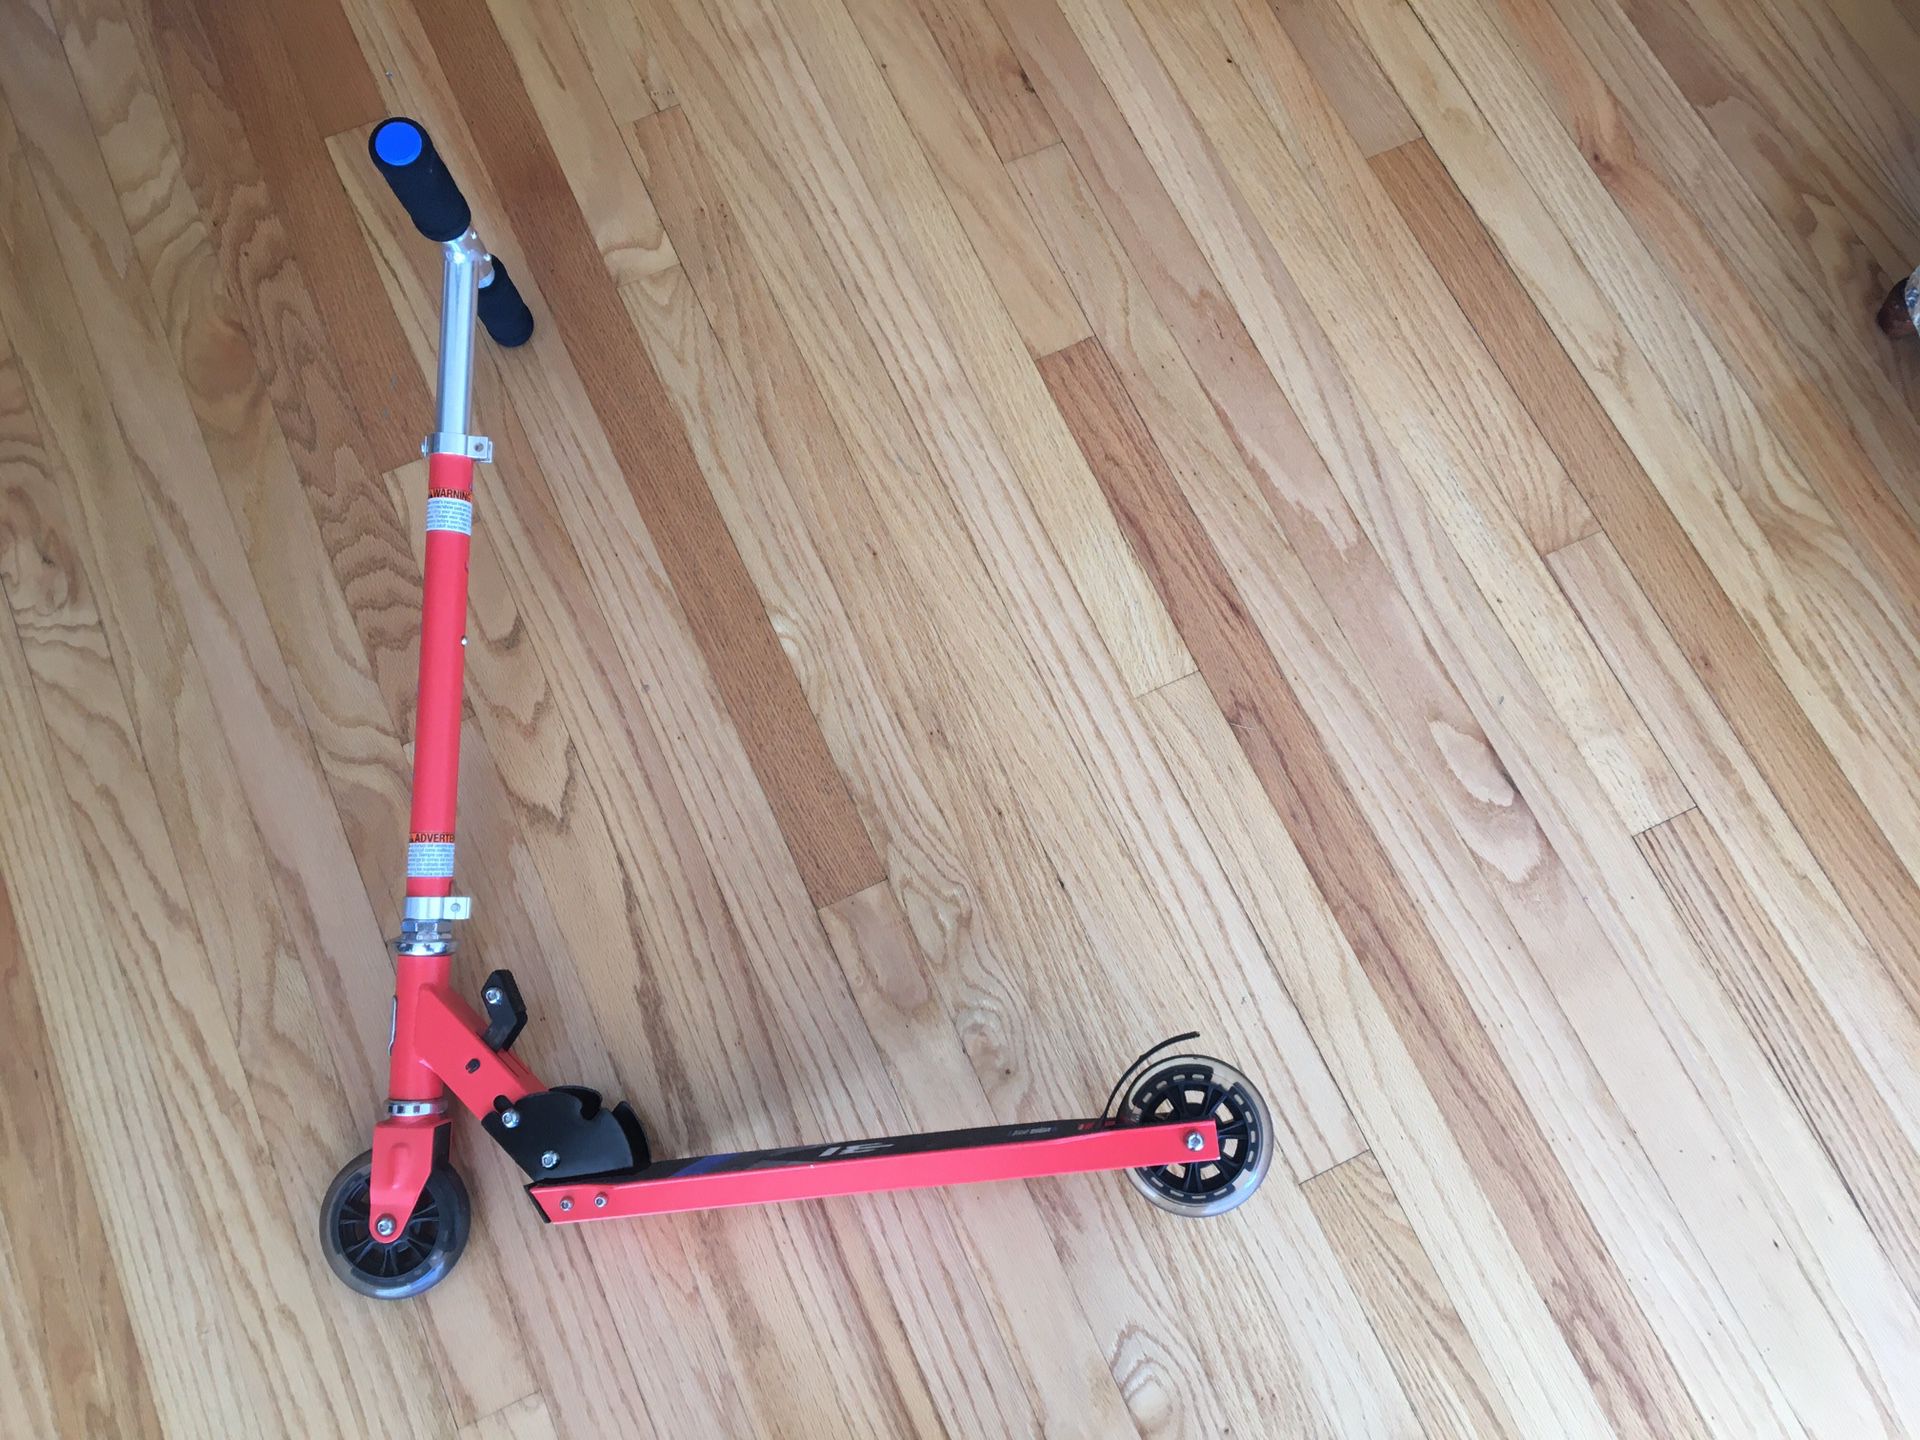 Mongoose Trace Kick Scooter Folding Design with lights